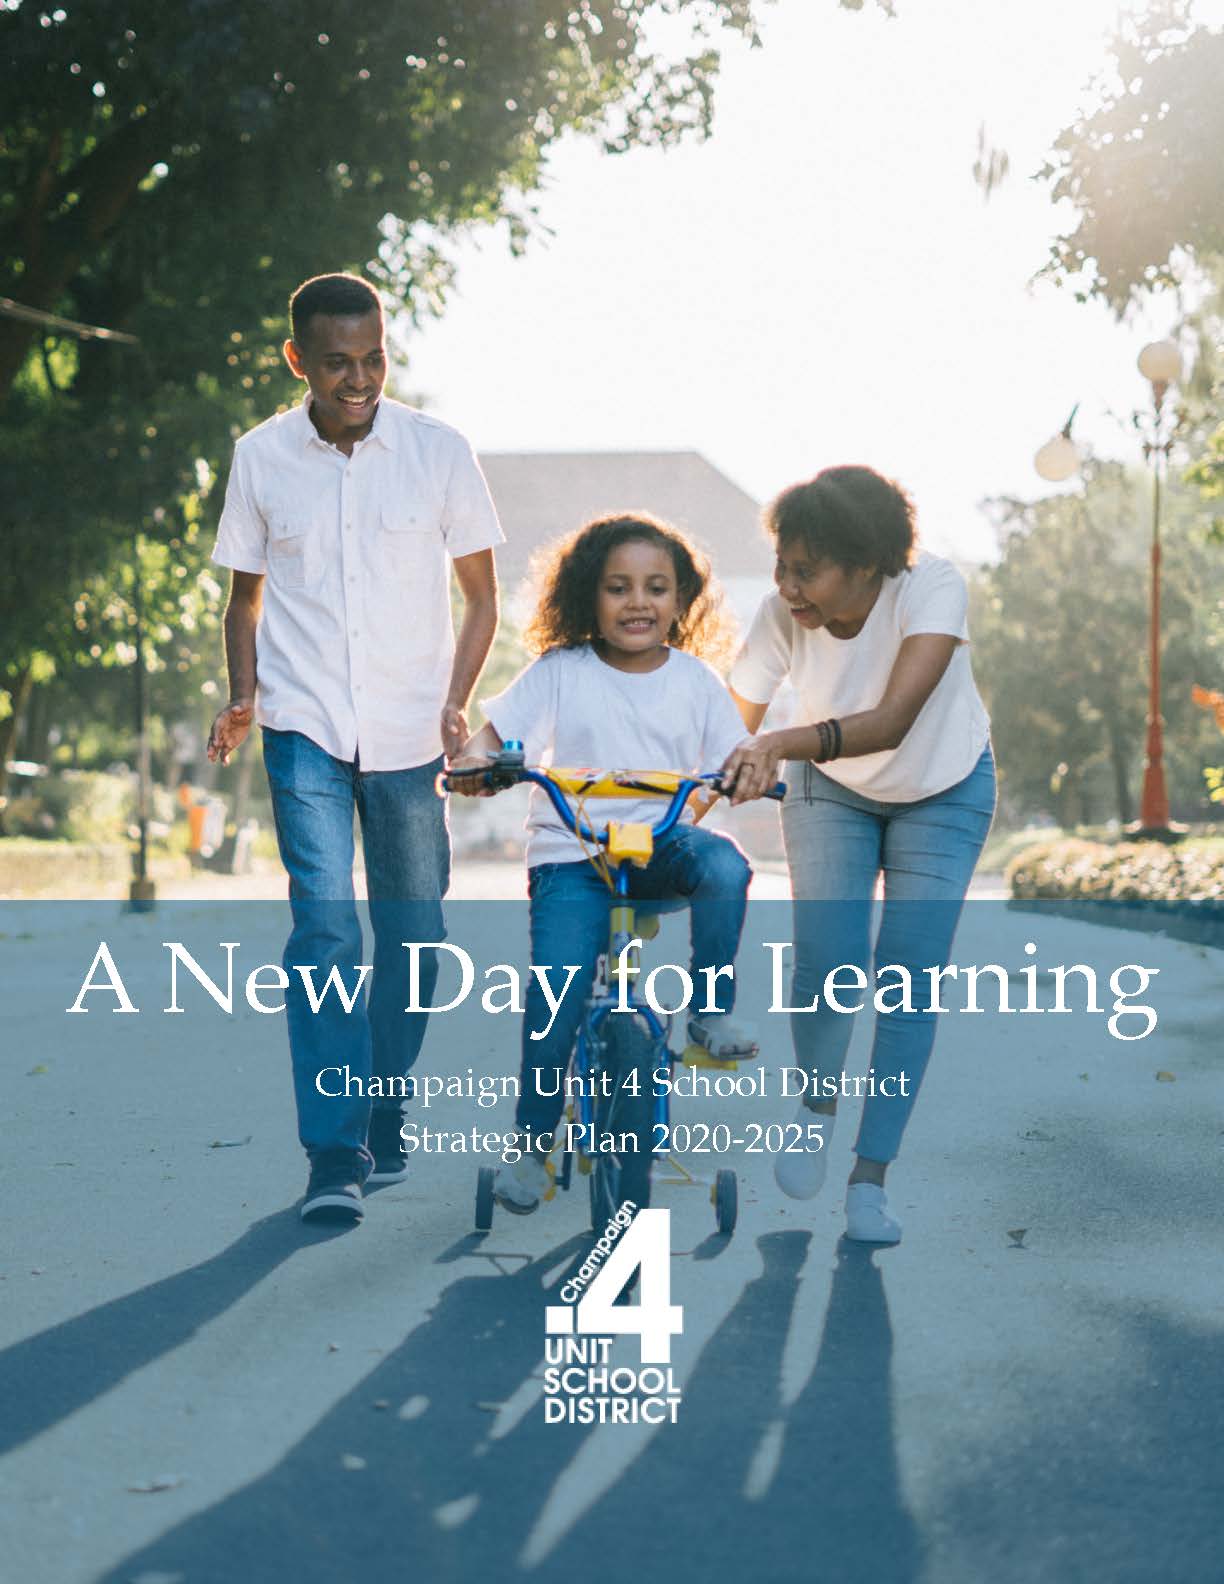  A New Day for Learning Strategic Plan link